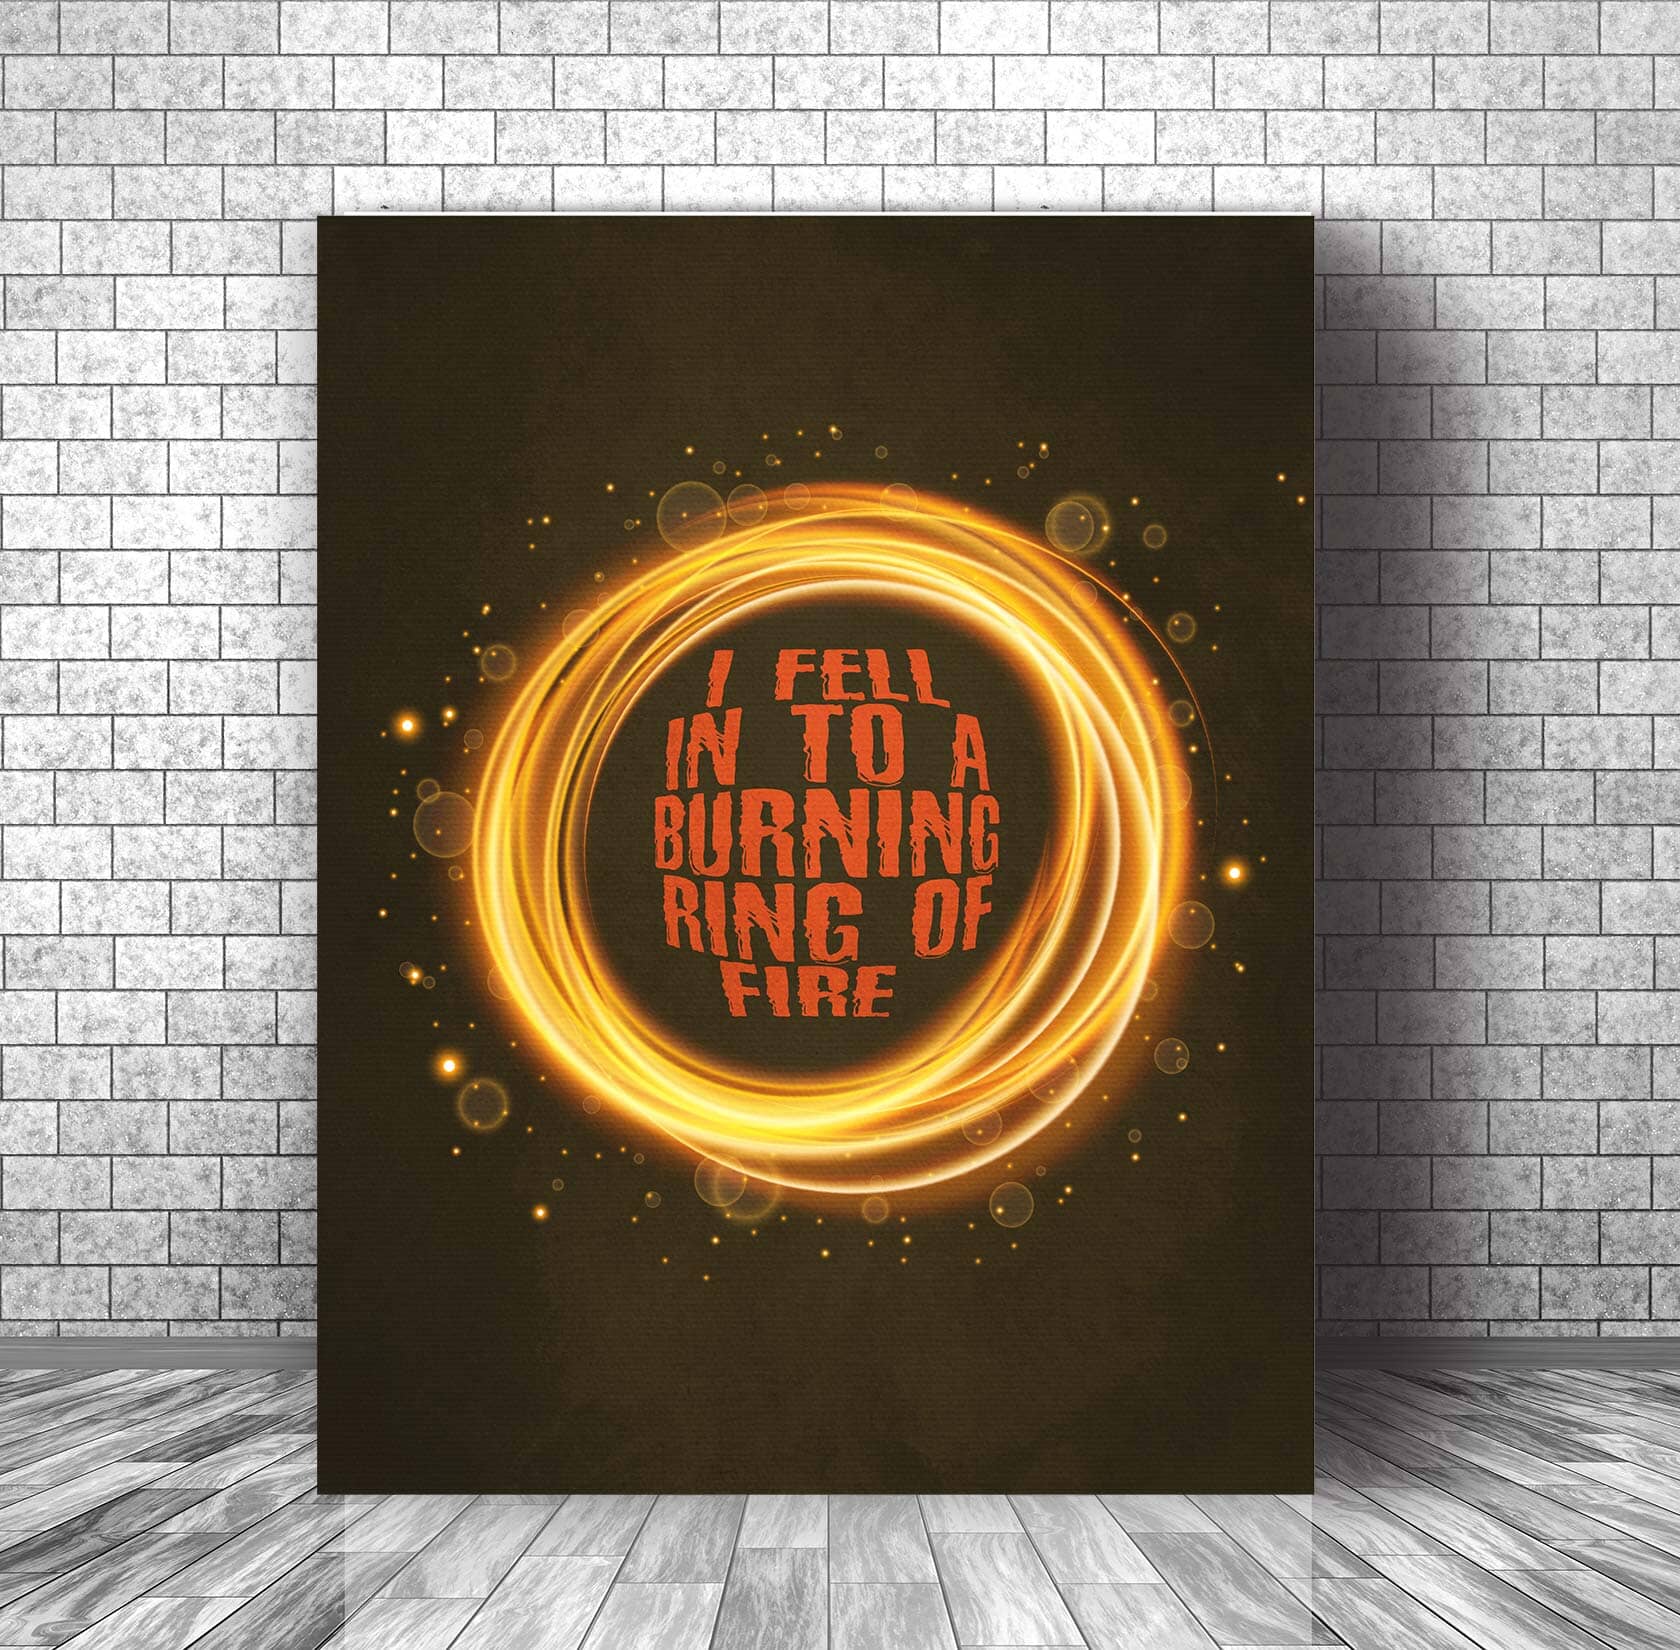 Ring of Fire by Johnny Cash - Country Music Song Lyrics Art Song Lyrics Art Song Lyrics Art 11x14 Canvas Wrap 